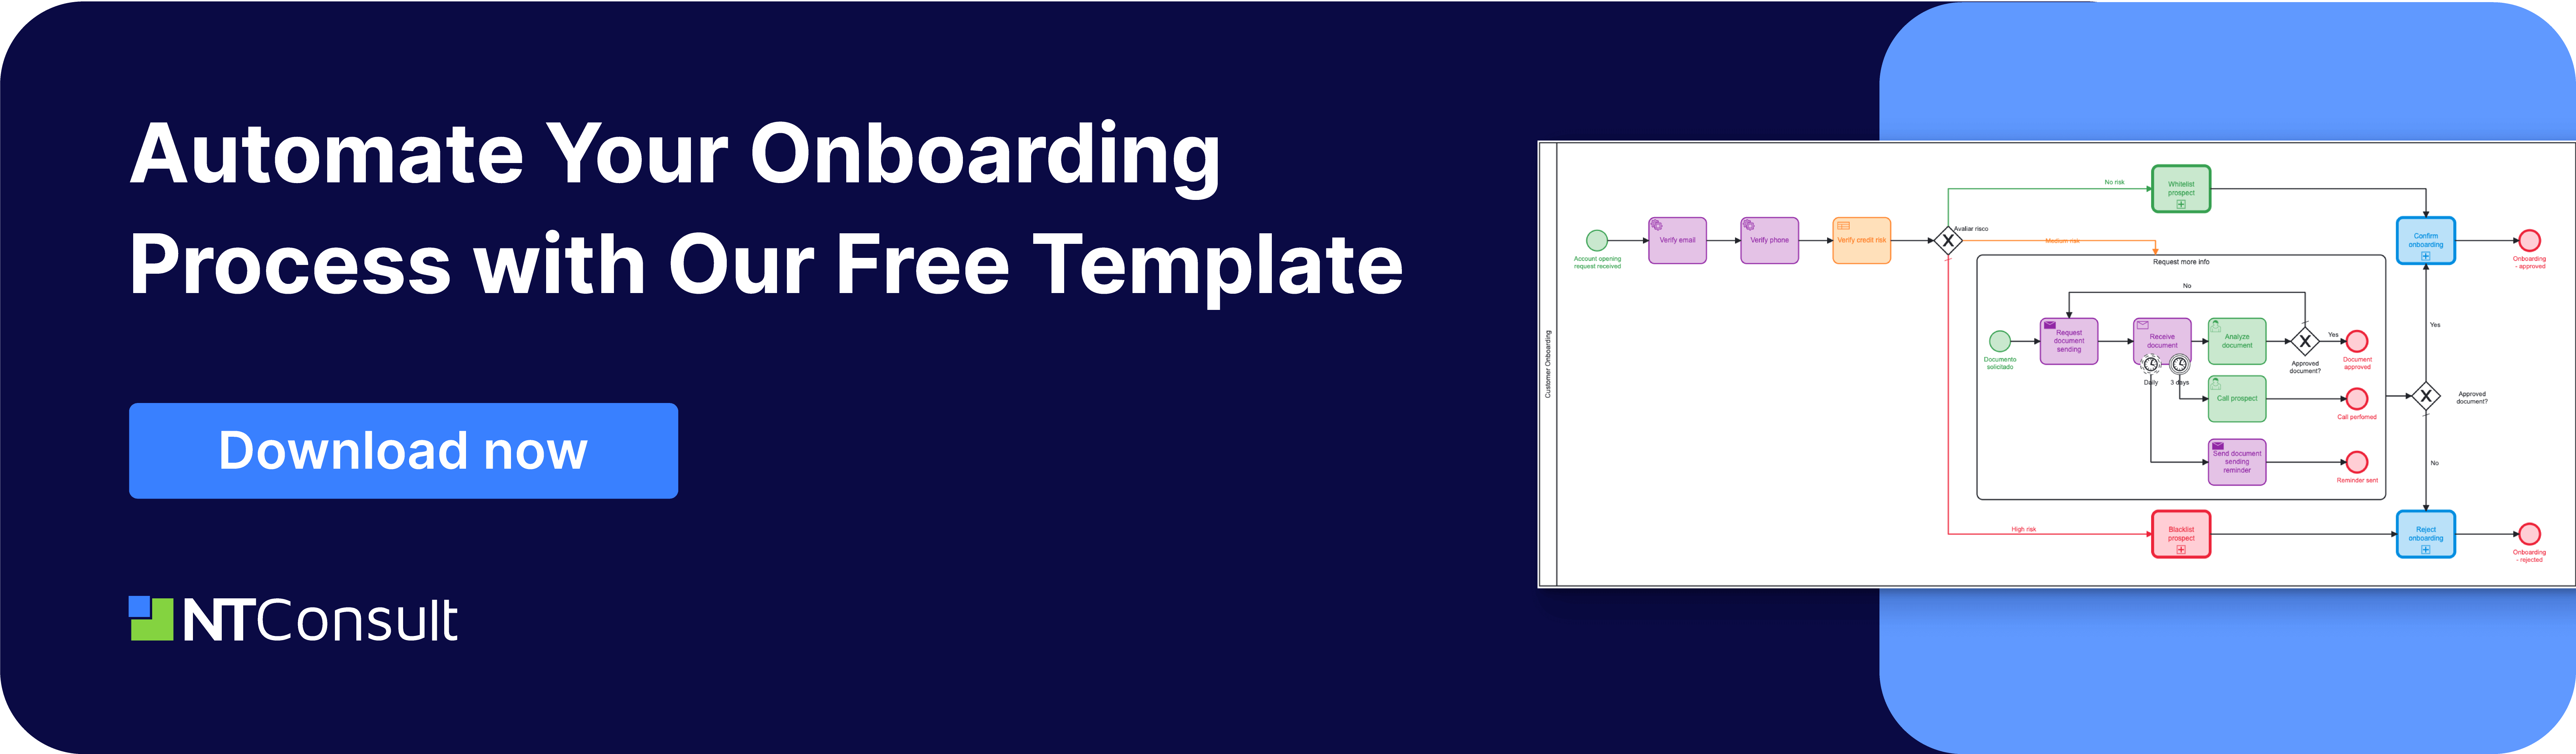 Onboarding and Know your customer template - NTConsult